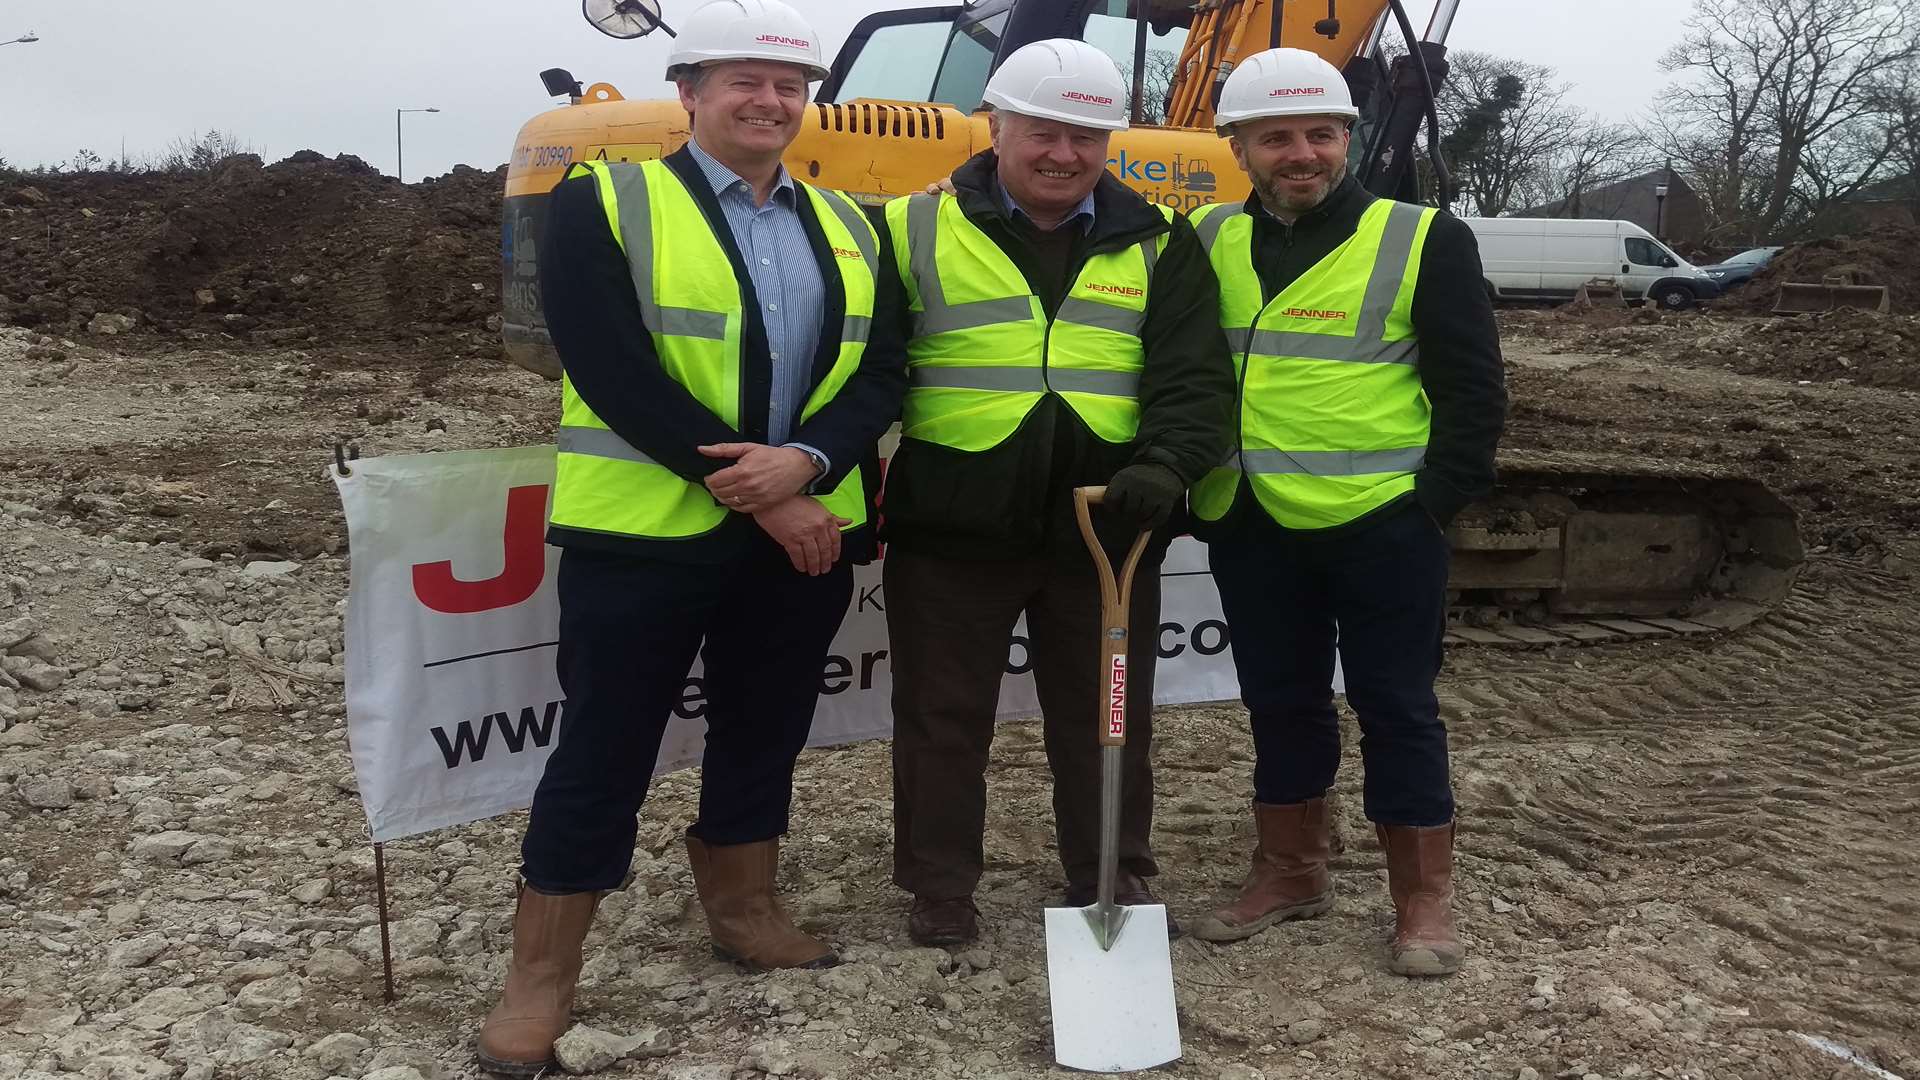 Martin Sandall, leader at Shepway District Council Cllr David Monk and Darren Welch, the development manager at Jenner. Picture: SDC